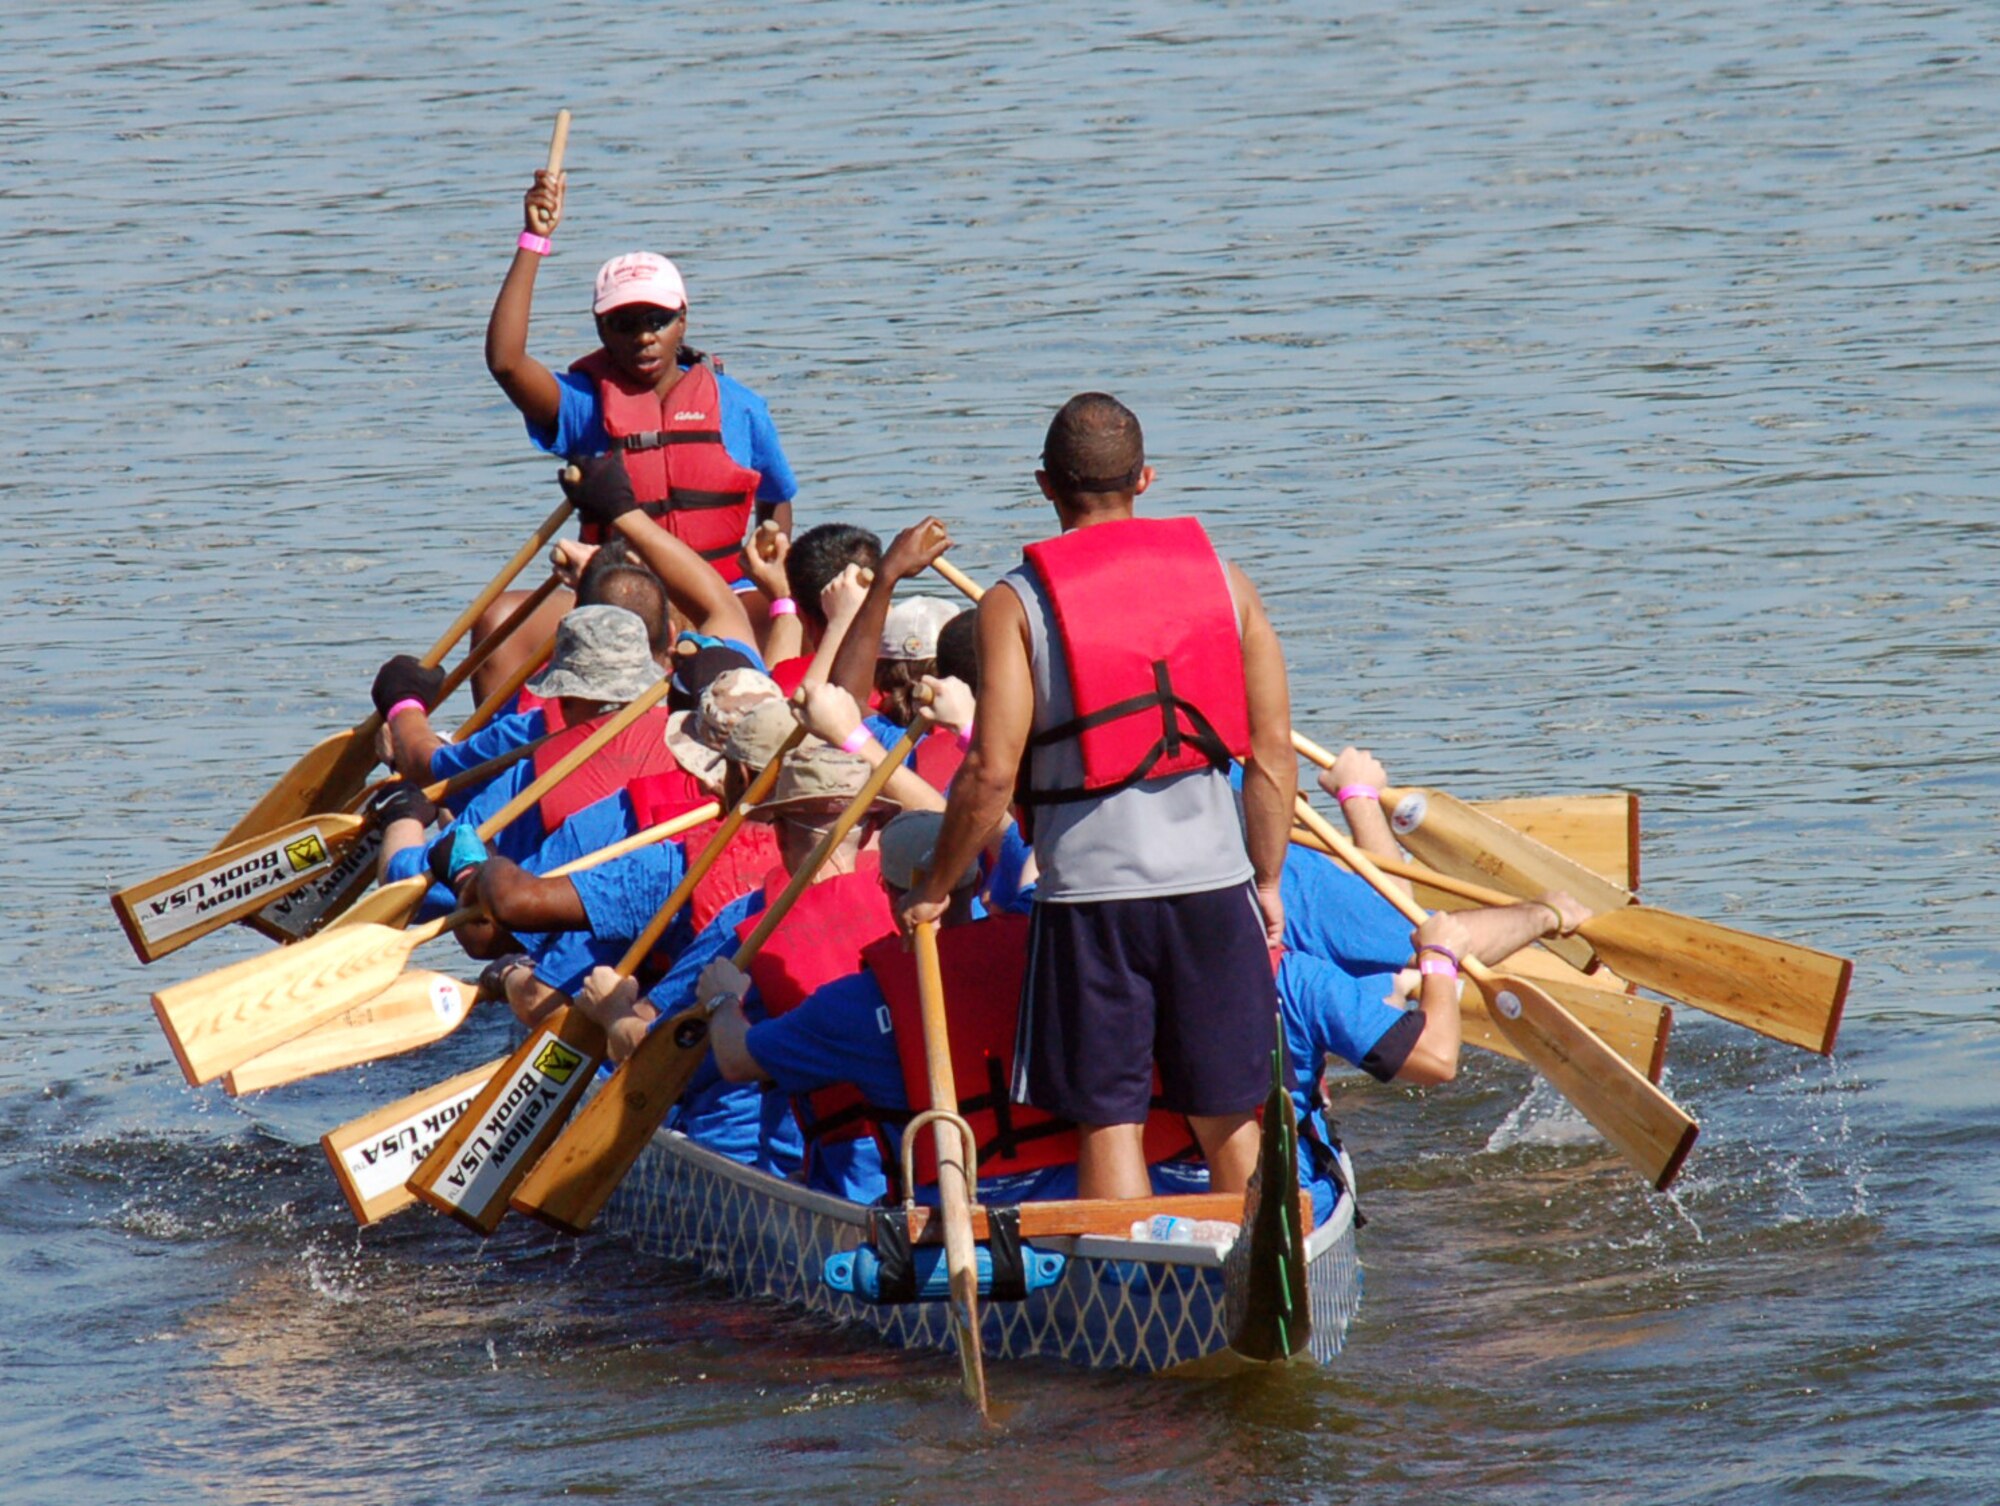 SHREVEPORT, La. - Jessica Sellers leads the “Mighty Eighth” dragon boat team out to the starting line of the dragon boat races during the third annual Red River Dragon Boat Festival Sept. 10, 2011. This year's race featured 27 teams, all vigorously paddling 41-foot-long boats to the finish line. Each team is comprised of a minimum of 20 paddlers, a captain and a drummer who beats the cadence as they paddle. (U.S. Air Force photo by Staff Sgt. Brian Stives)